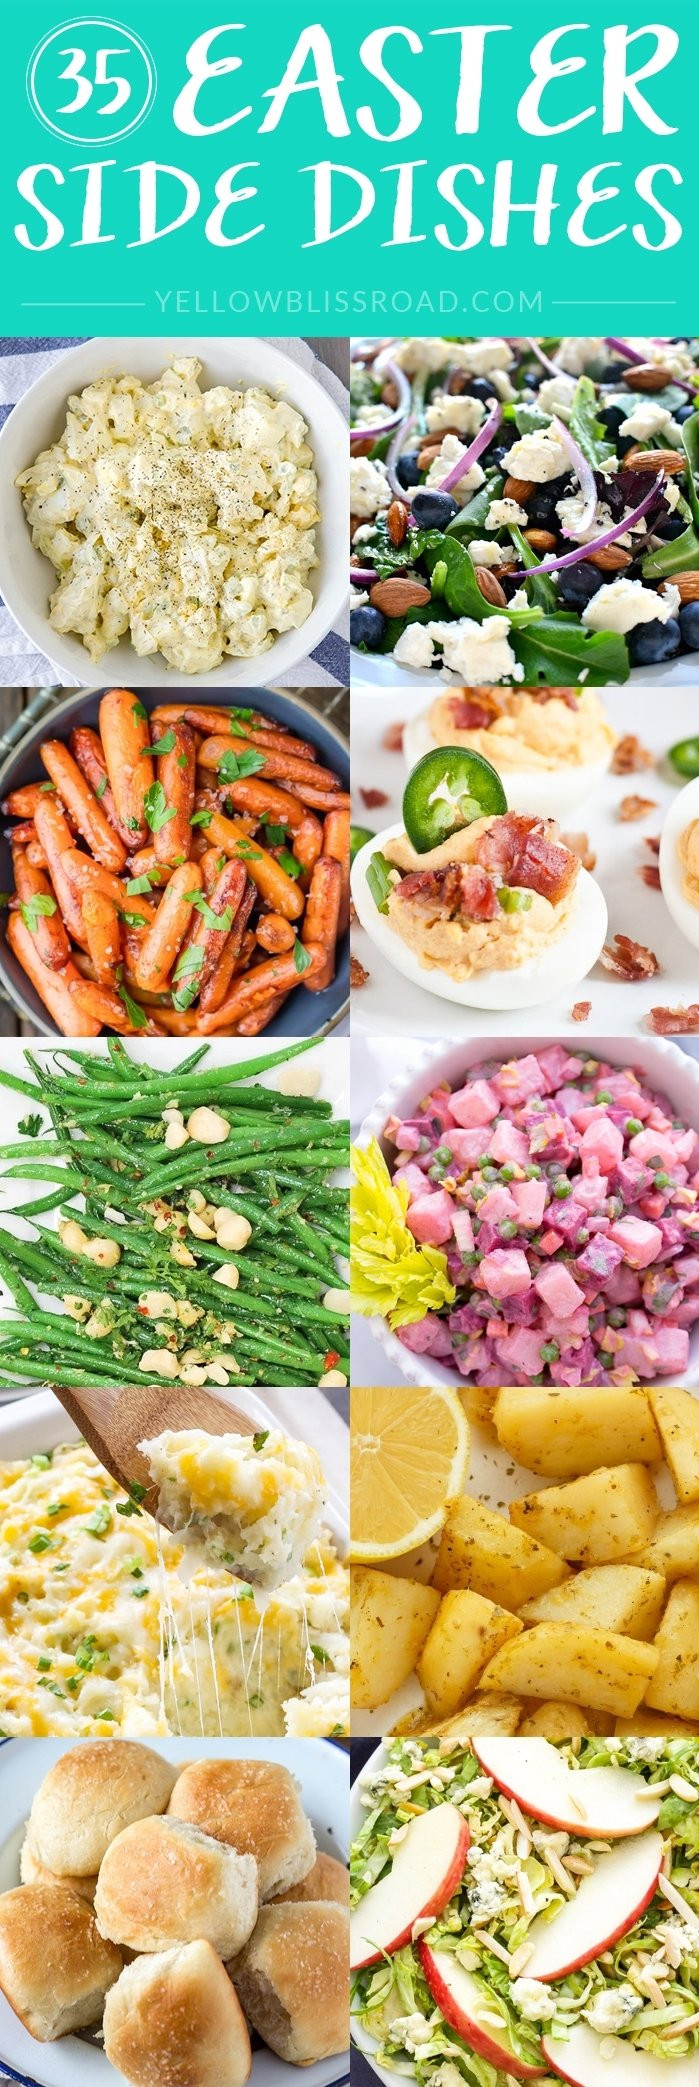 Easter Lunch Ideas
 10 Trendy Lunch Ideas For A Crowd 2021